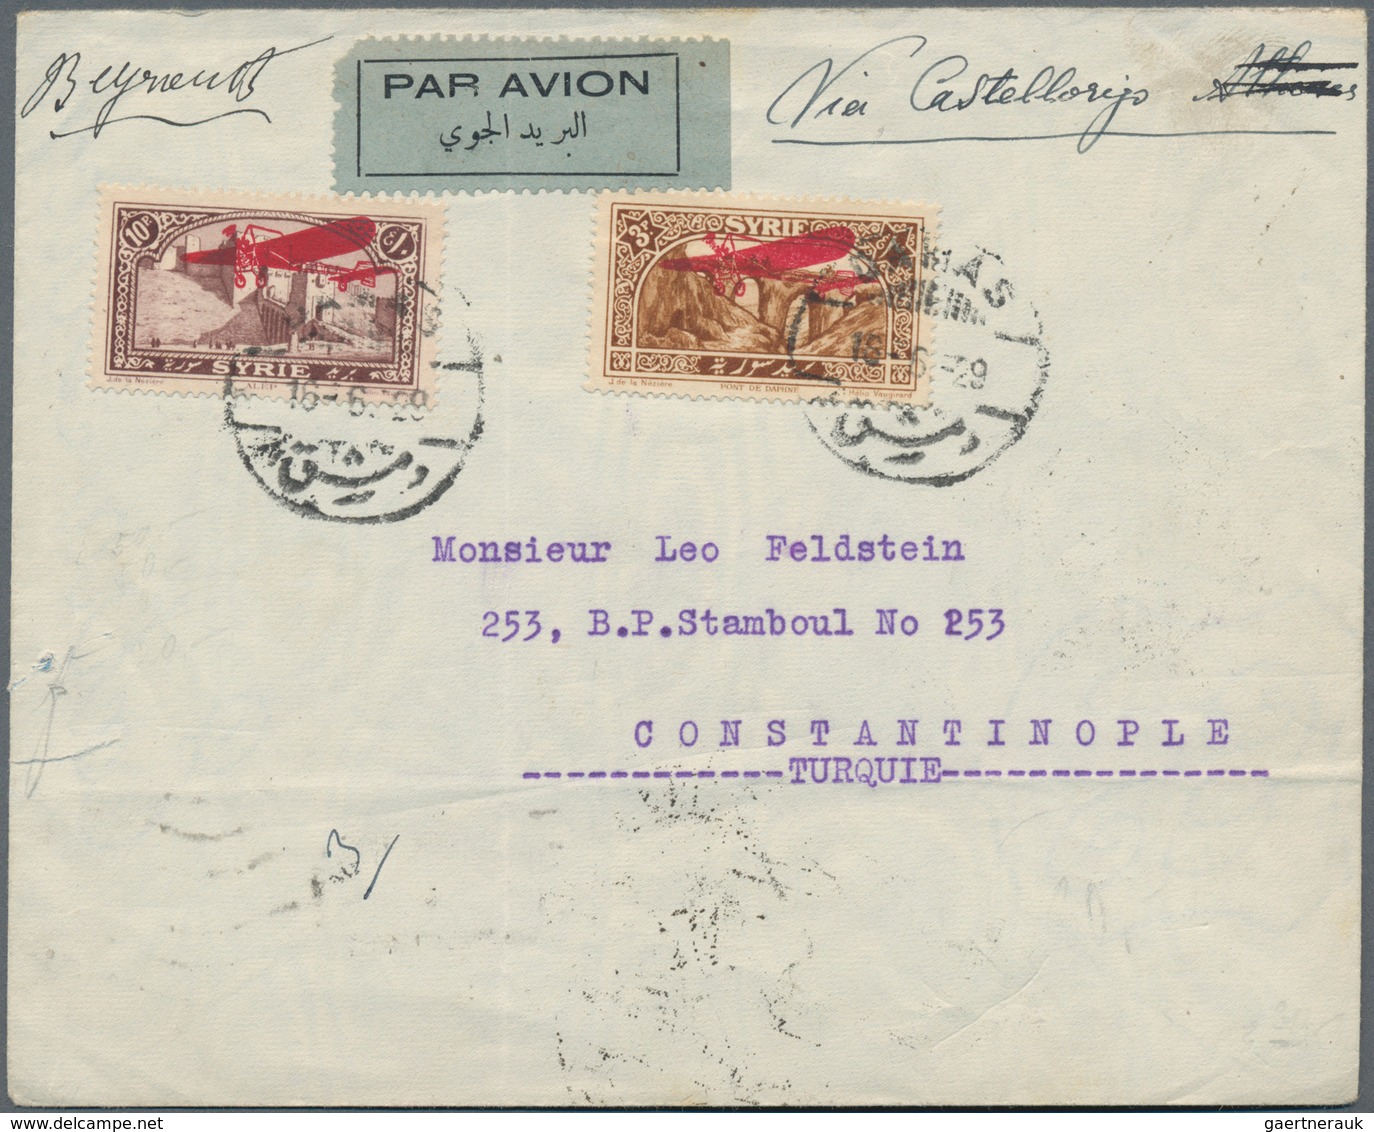 Syrien: 1917/1960 (ca.), mainly 1940s/1950s, holding of apprx. 390 covers/cards, mainly commercial c